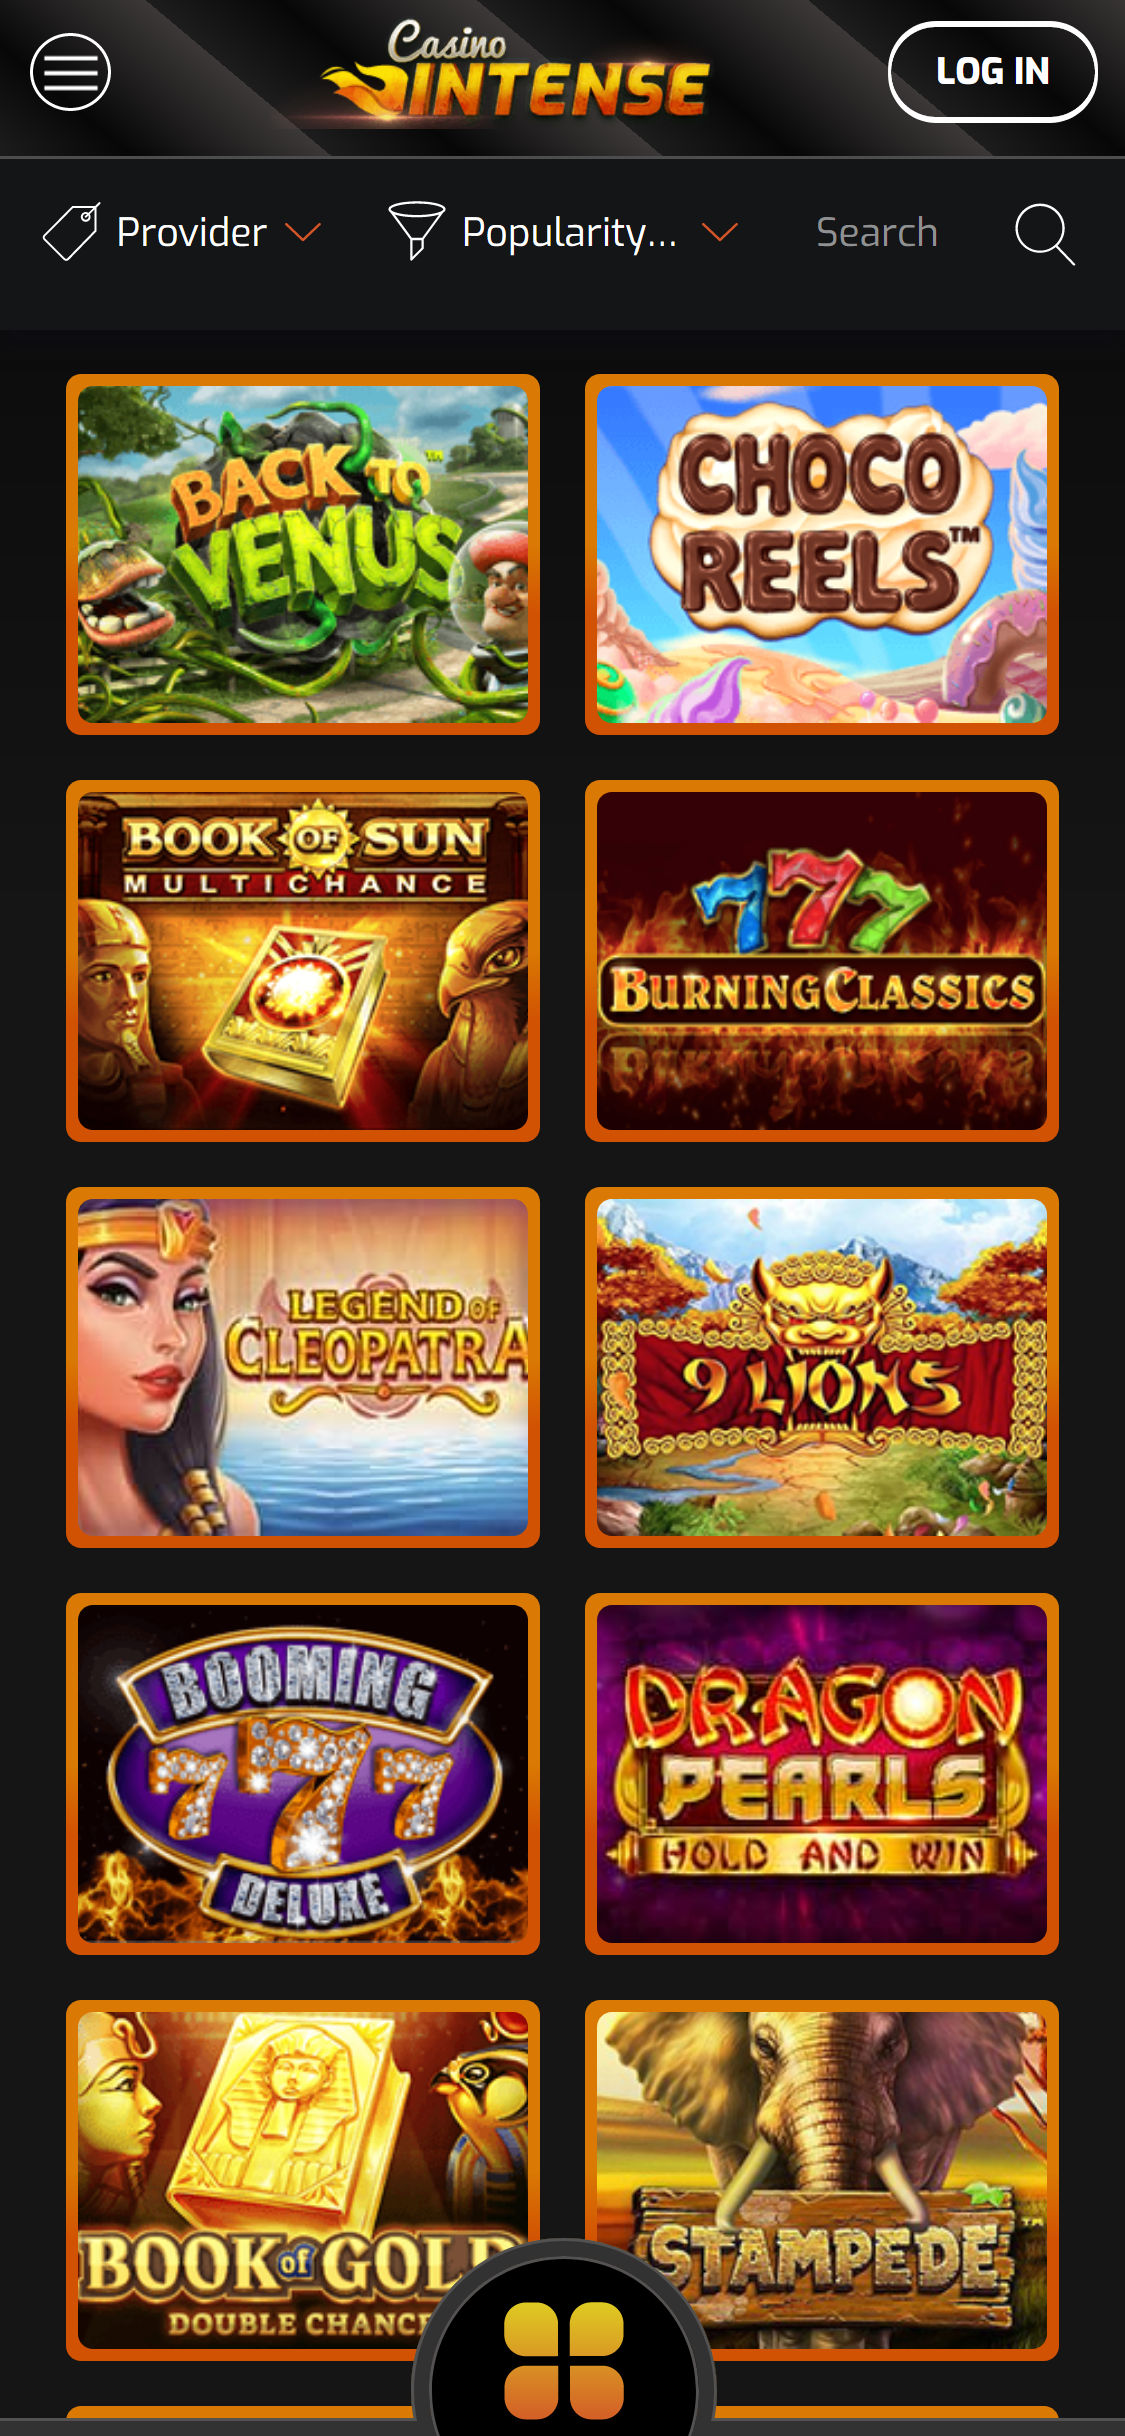 Casino Intense Mobile Games Review